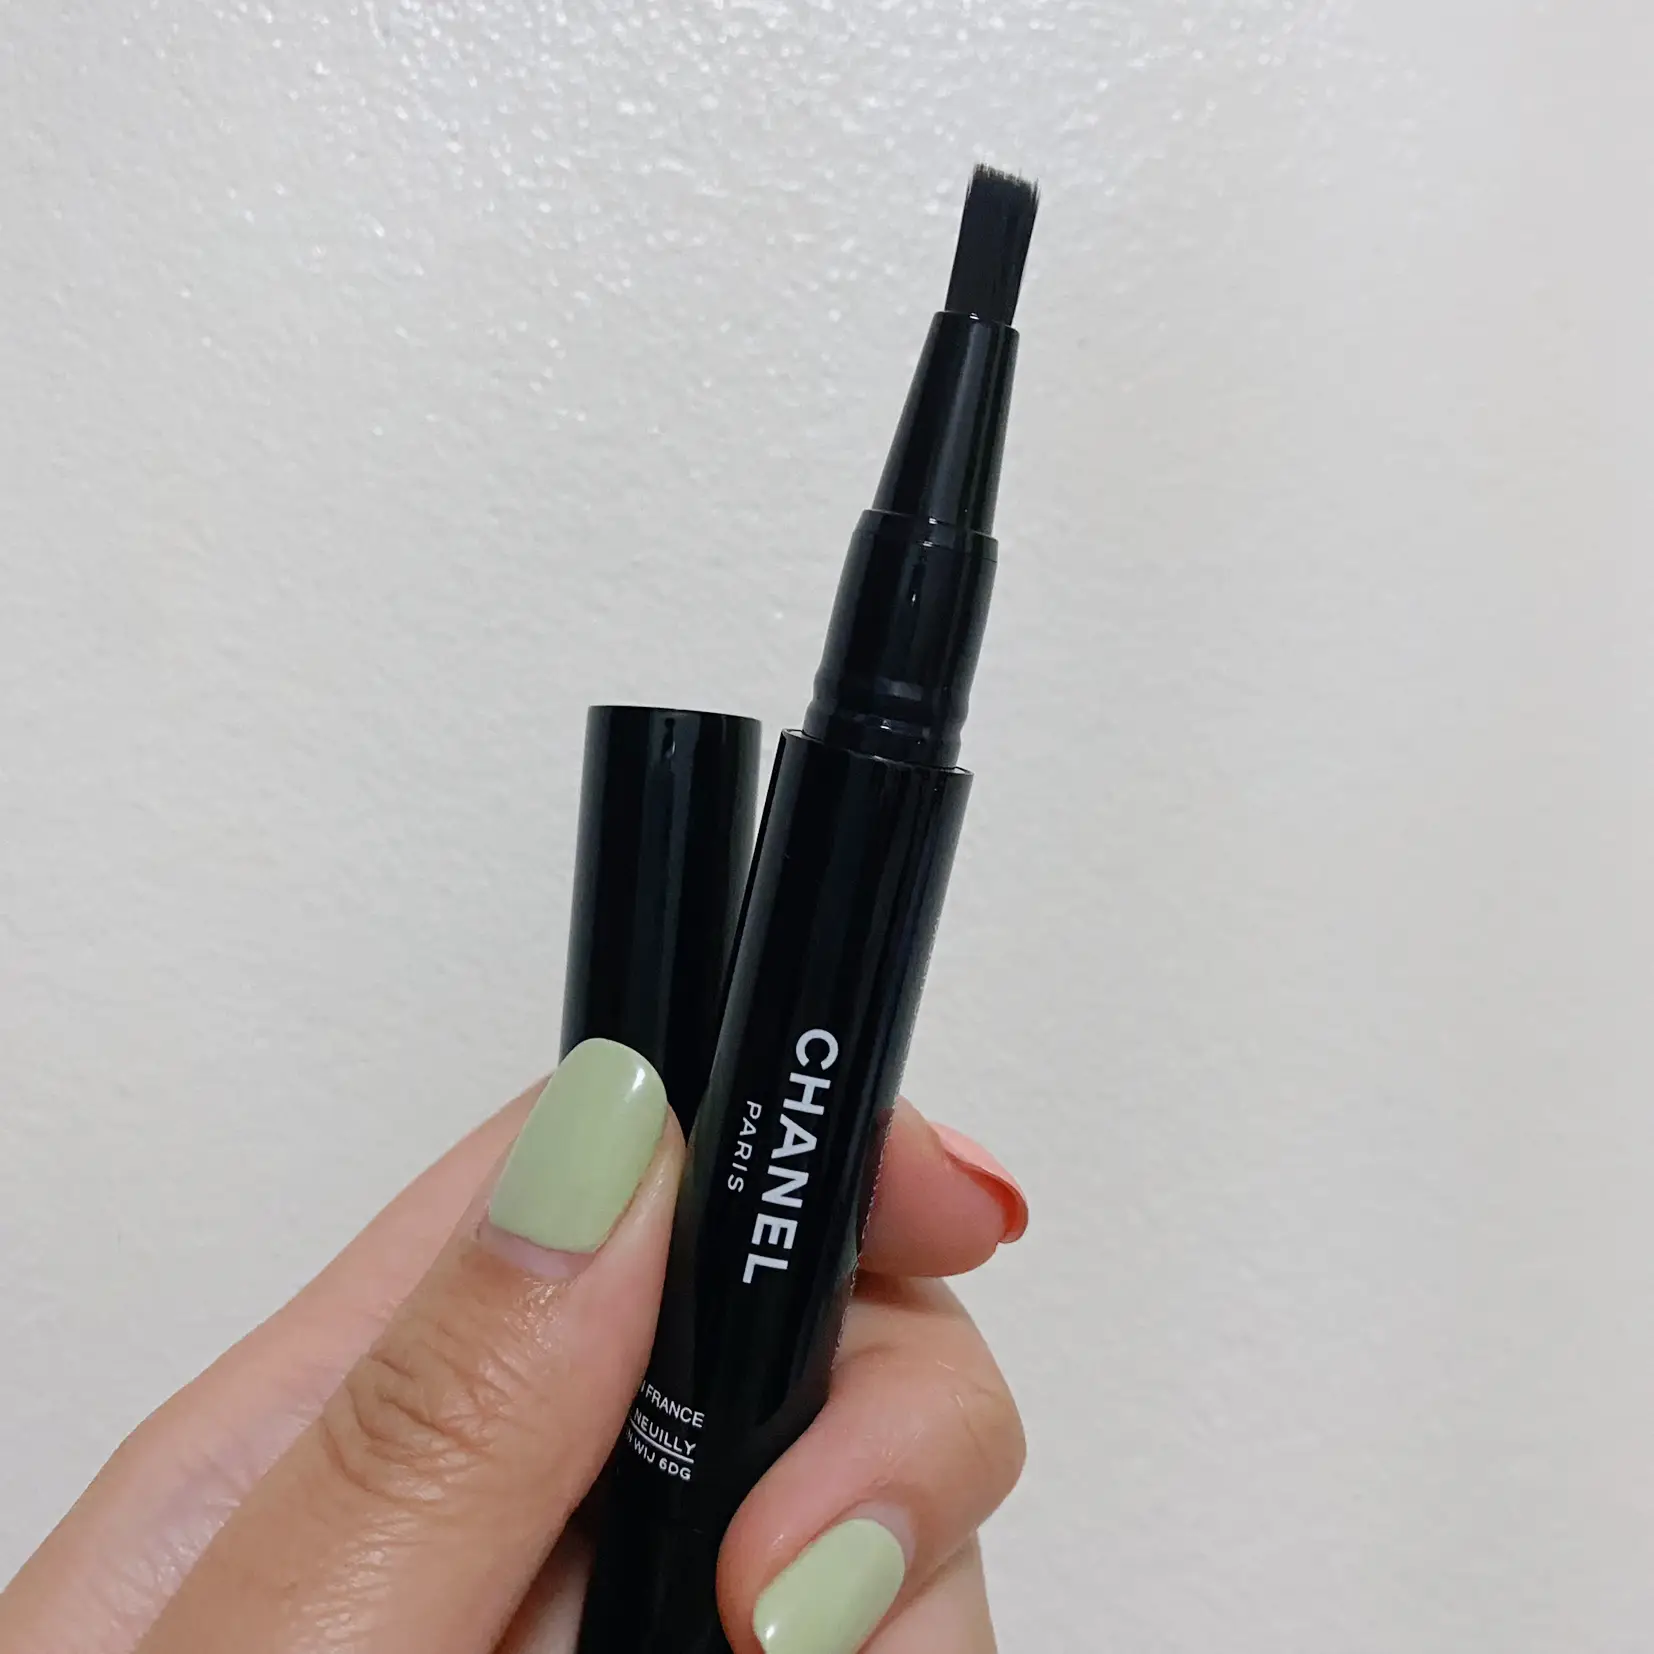 Unboxed Chanel The Newest Call 🌷😆✨ Stylo Lumiere Regard, Gallery posted  by LittlecatReview